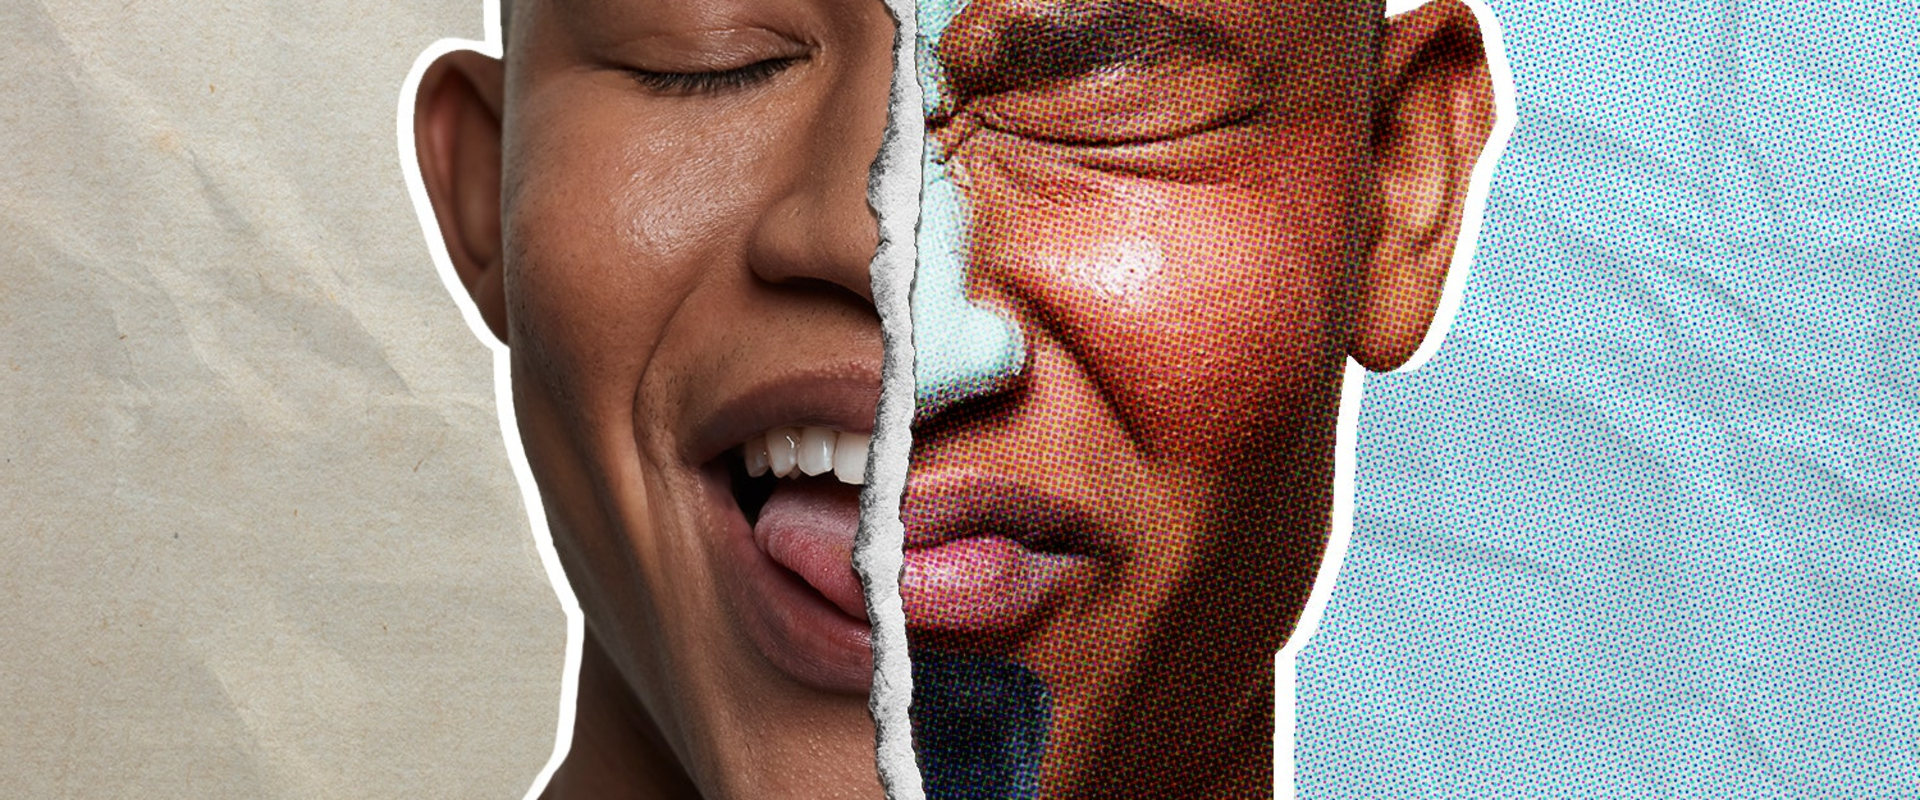 The Tell-Tale Signs of a Harsh Skincare Routine for Men: What to Look Out For